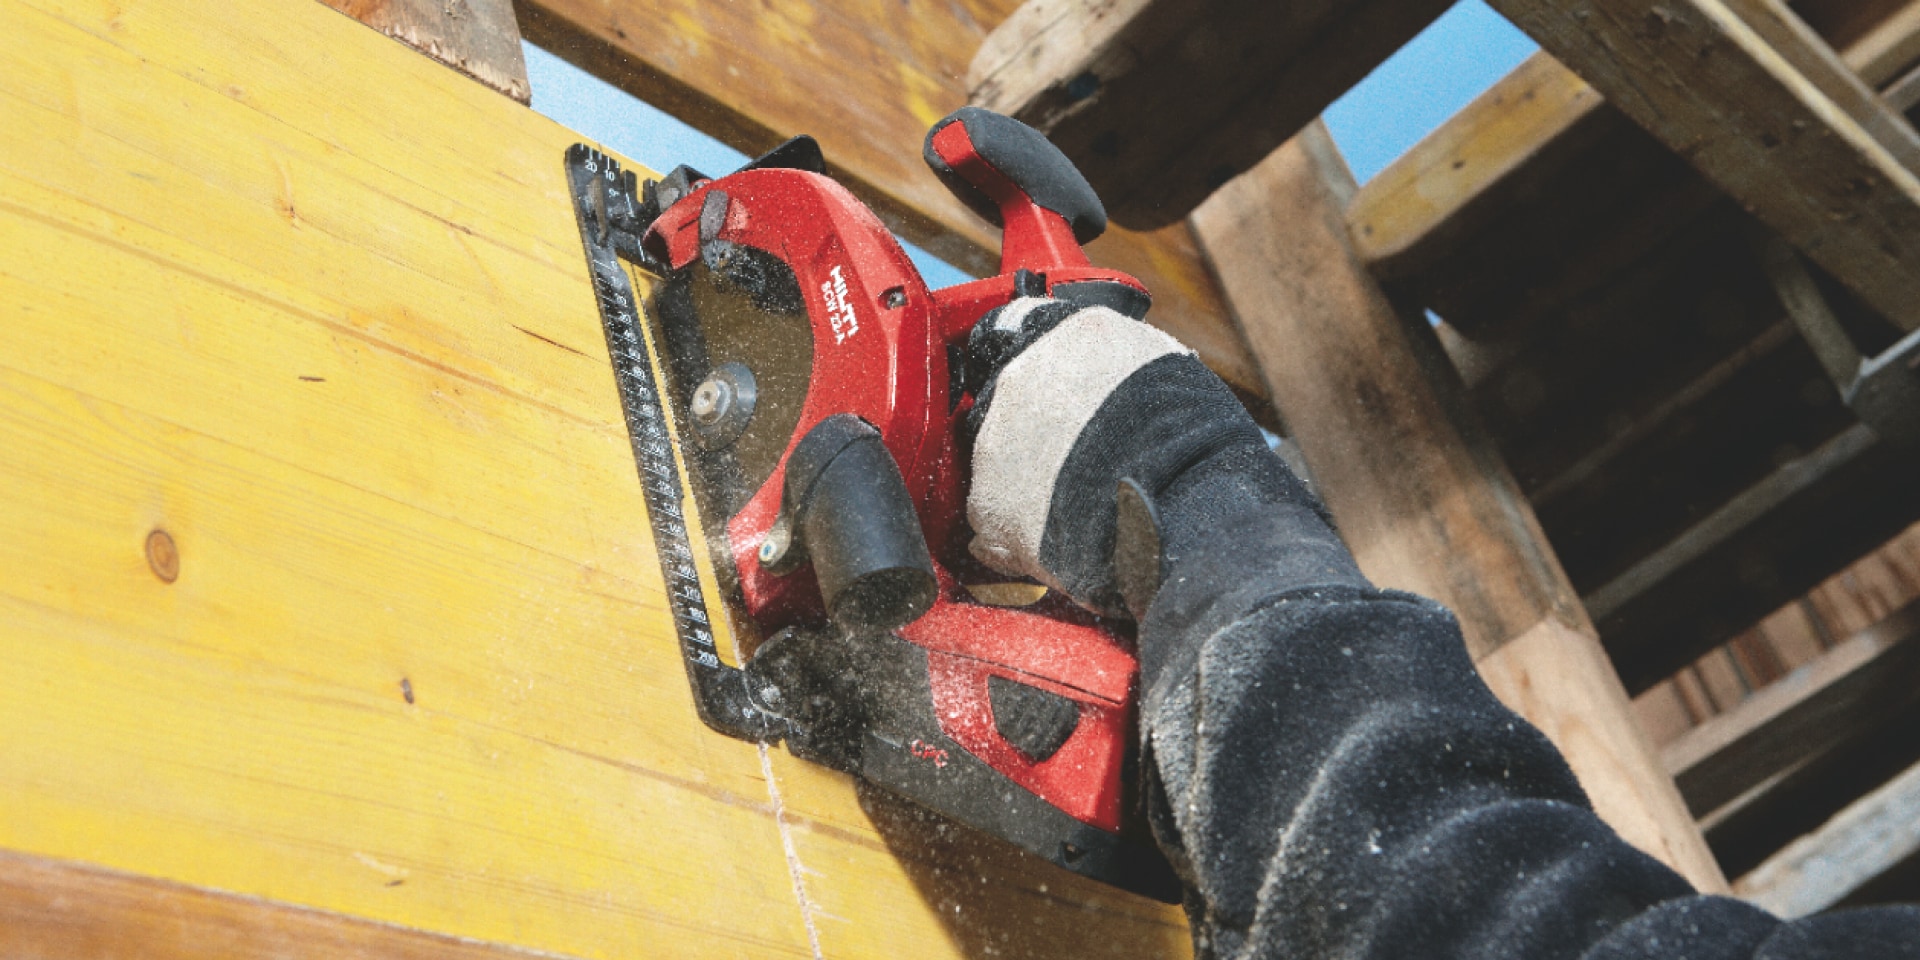 SCW 22-A Cordless circular saw being used to cut wood